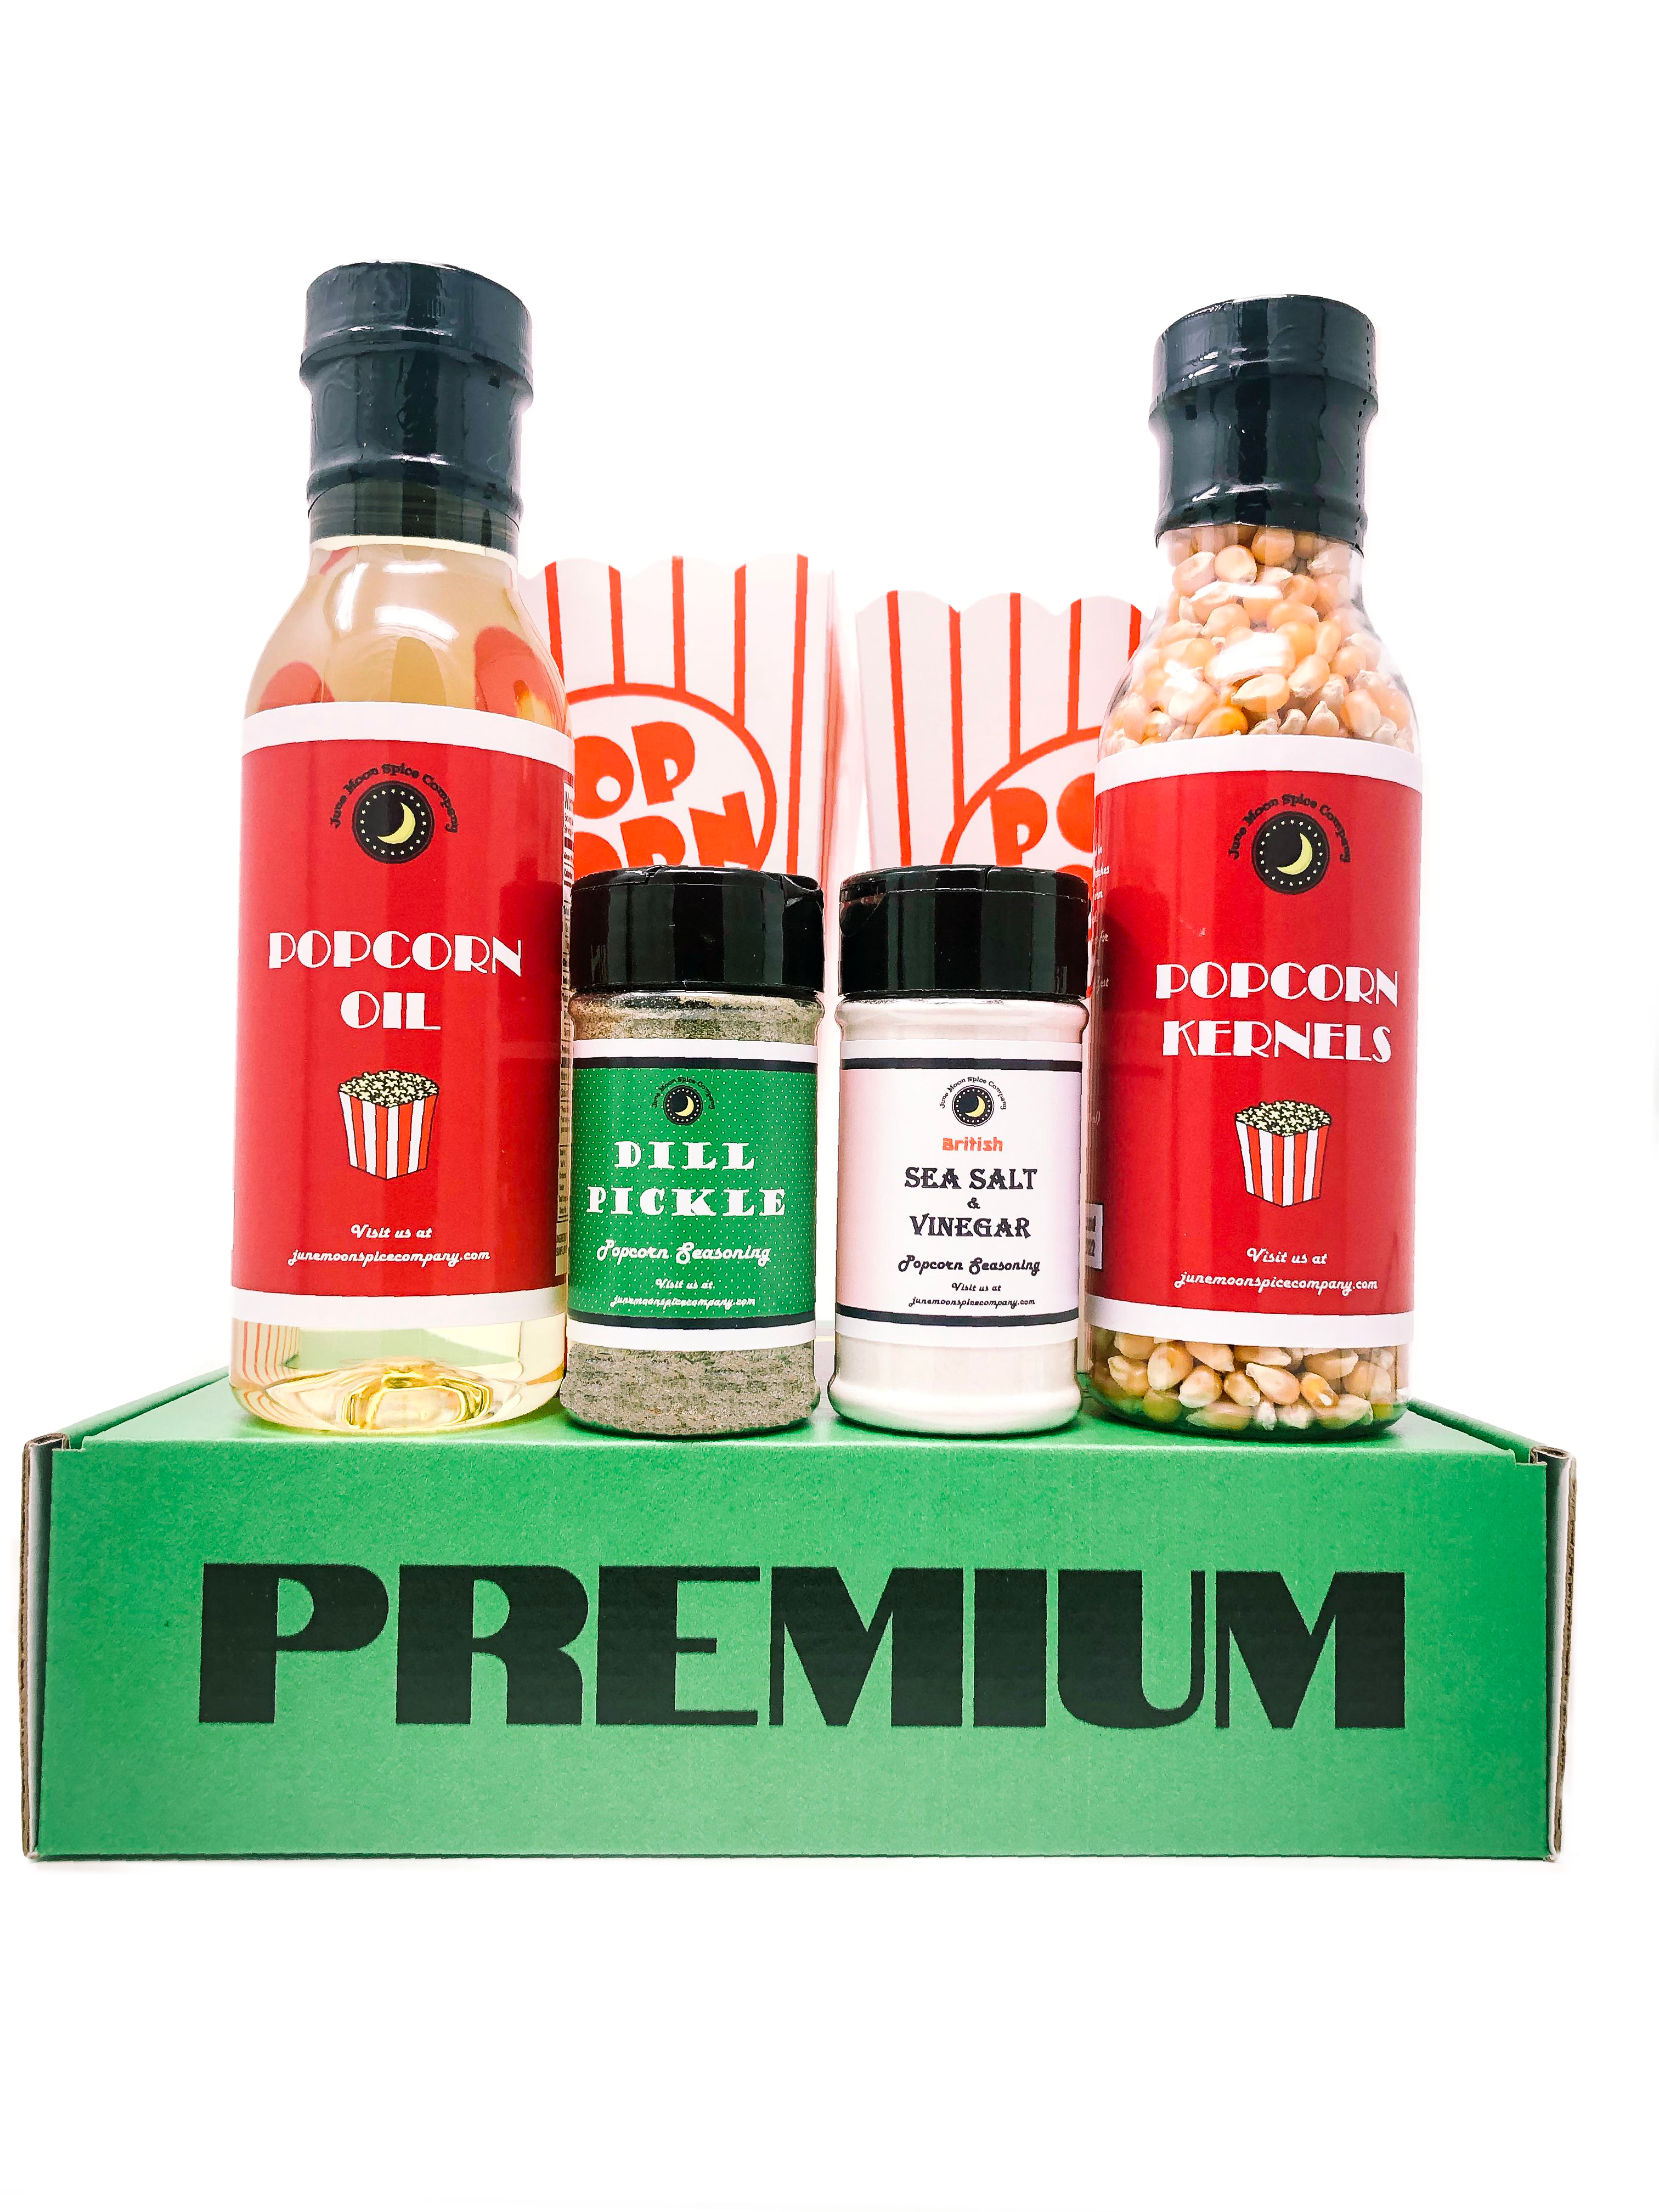 Popcorn Seasoning Monthly Subscription Box - Introductory